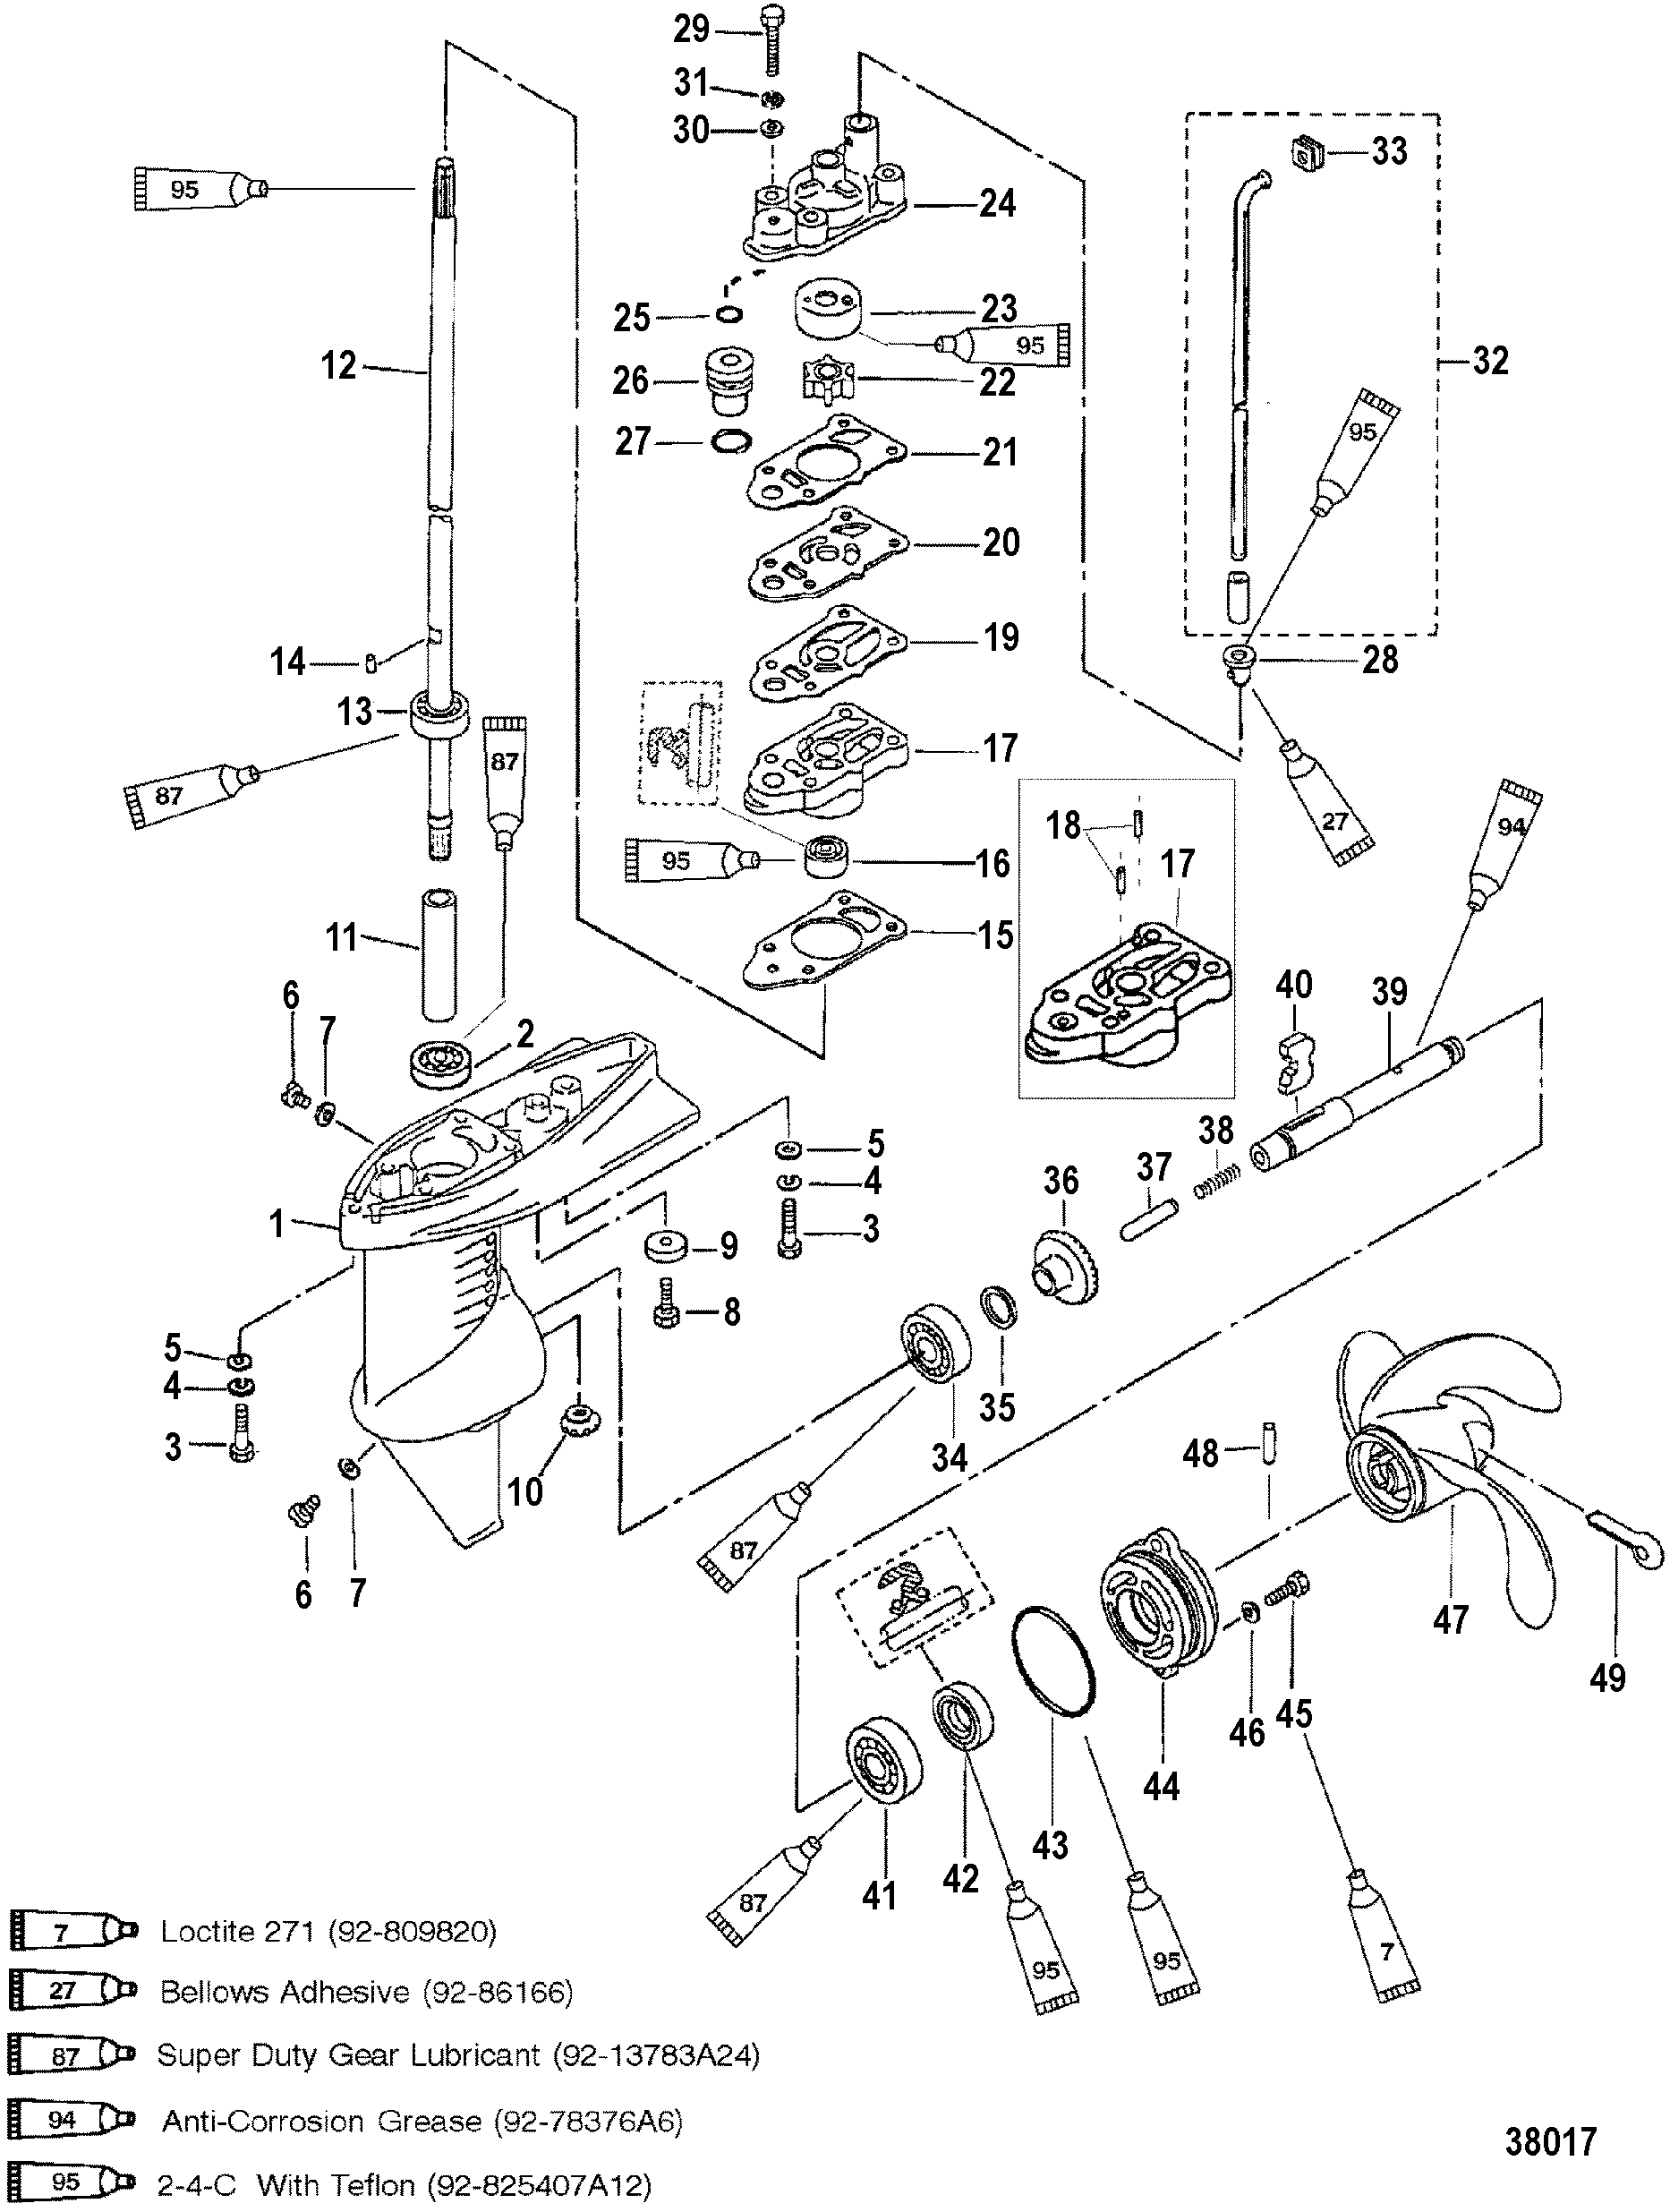 Gallery of Yamaha 4hp Outboard Parts Diagram.